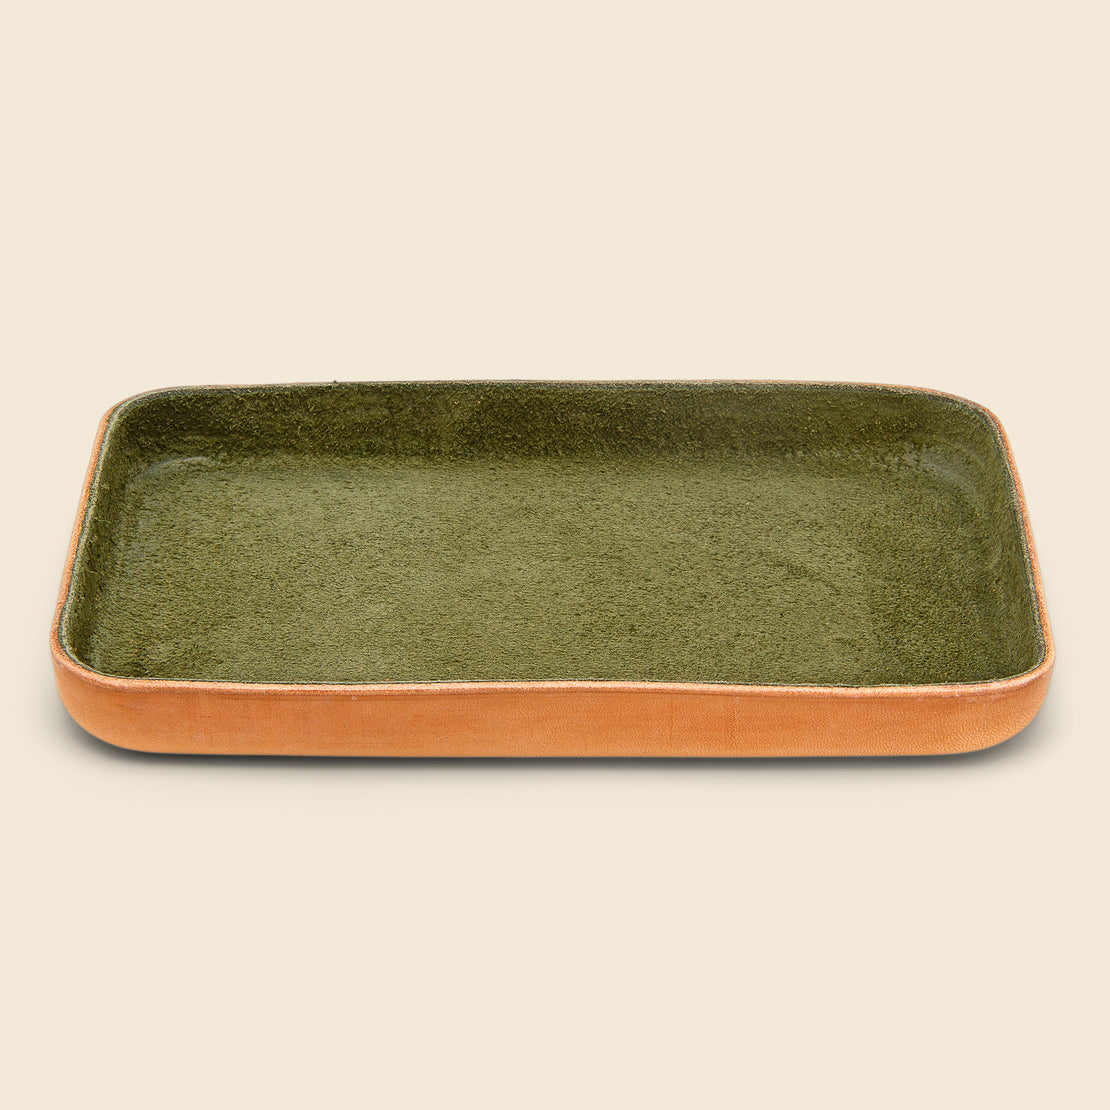 Home Medium Suede Tray - Olive